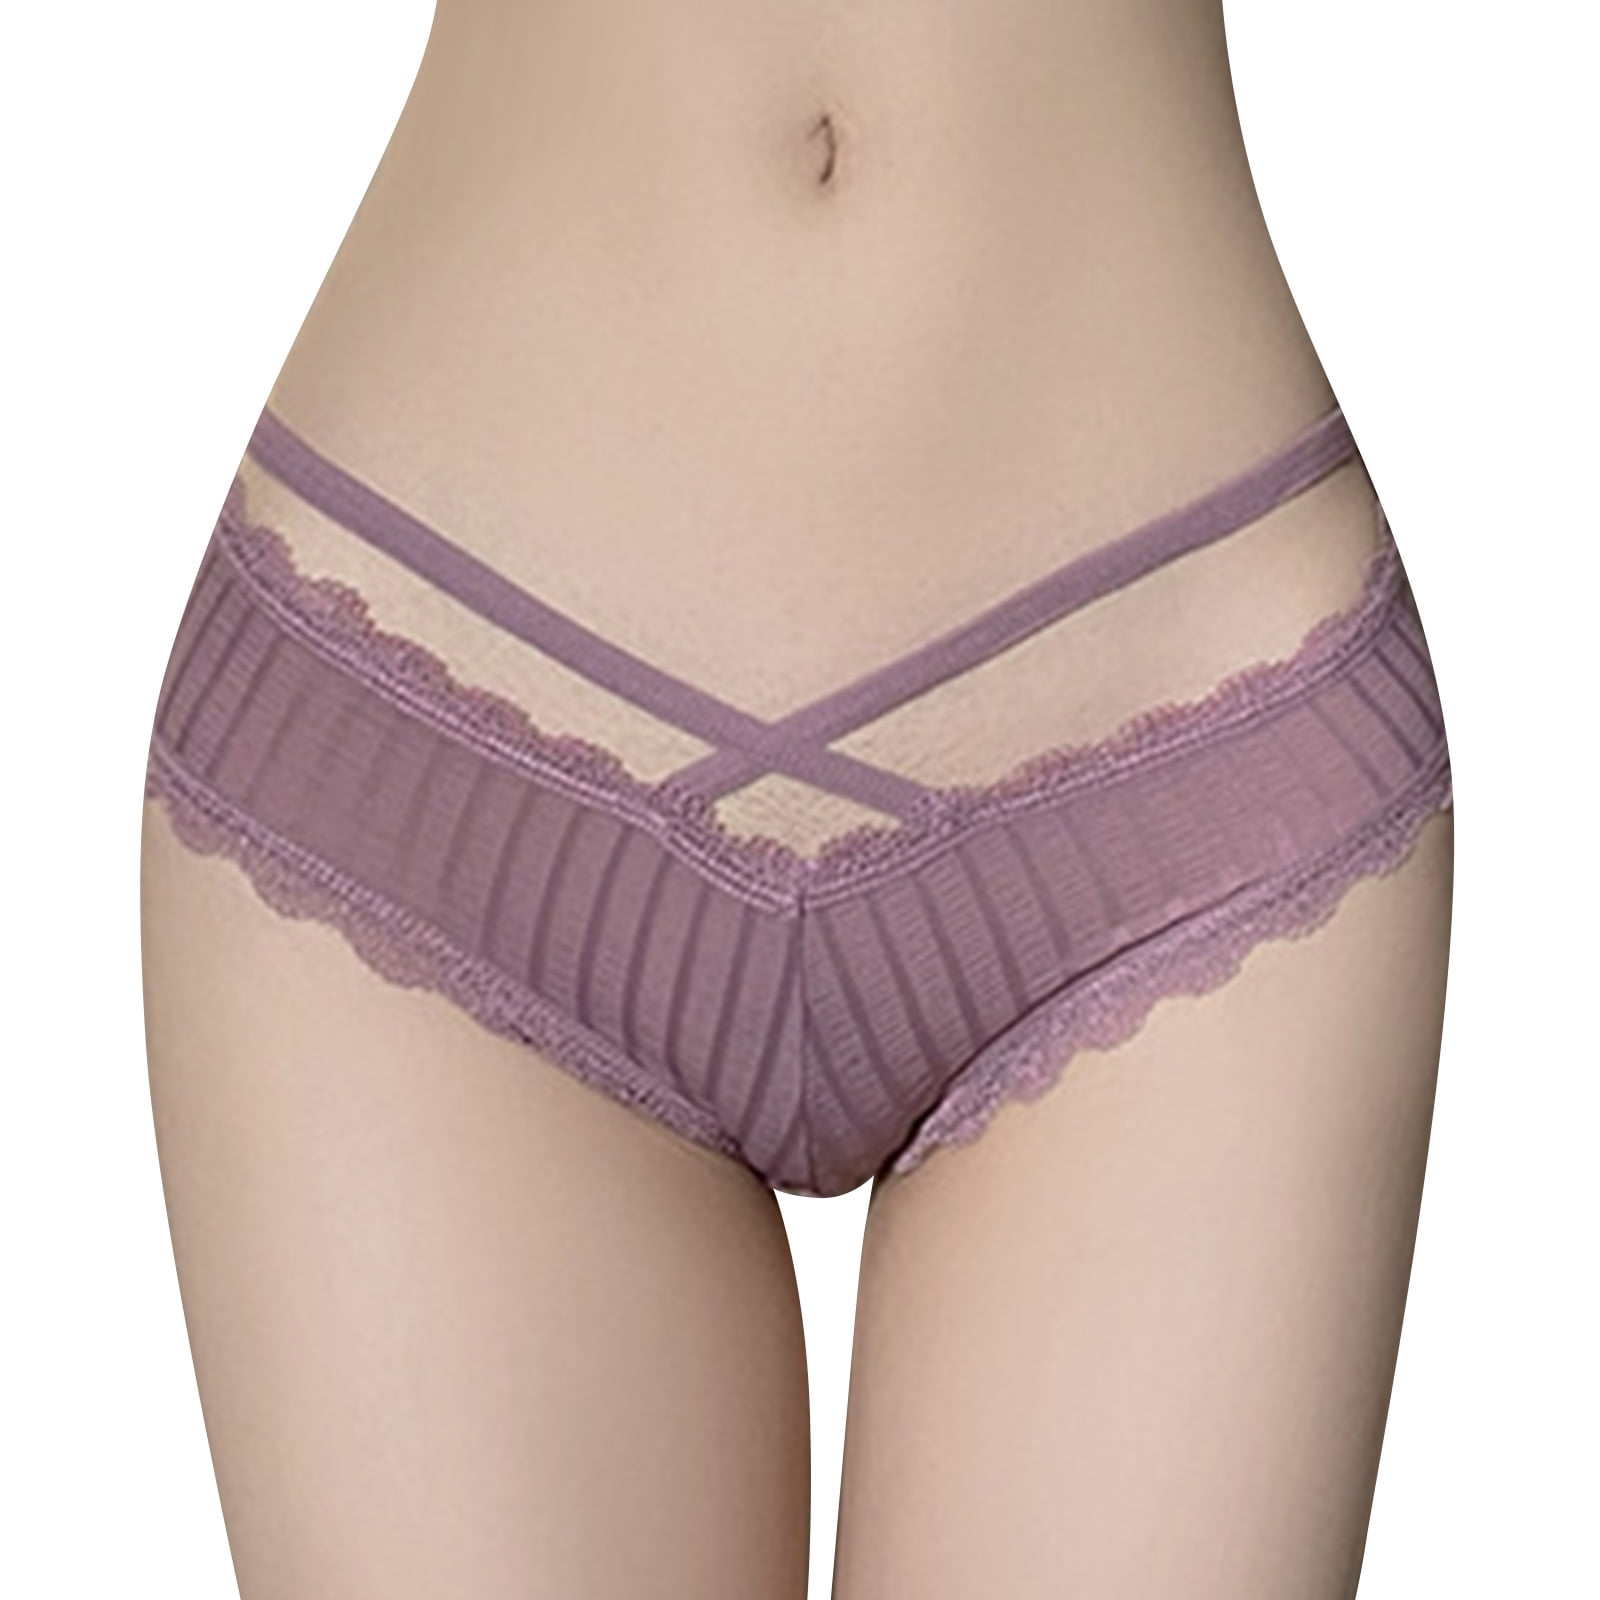 Wholesale Tight Teen Panties Cotton, Lace, Seamless, Shaping